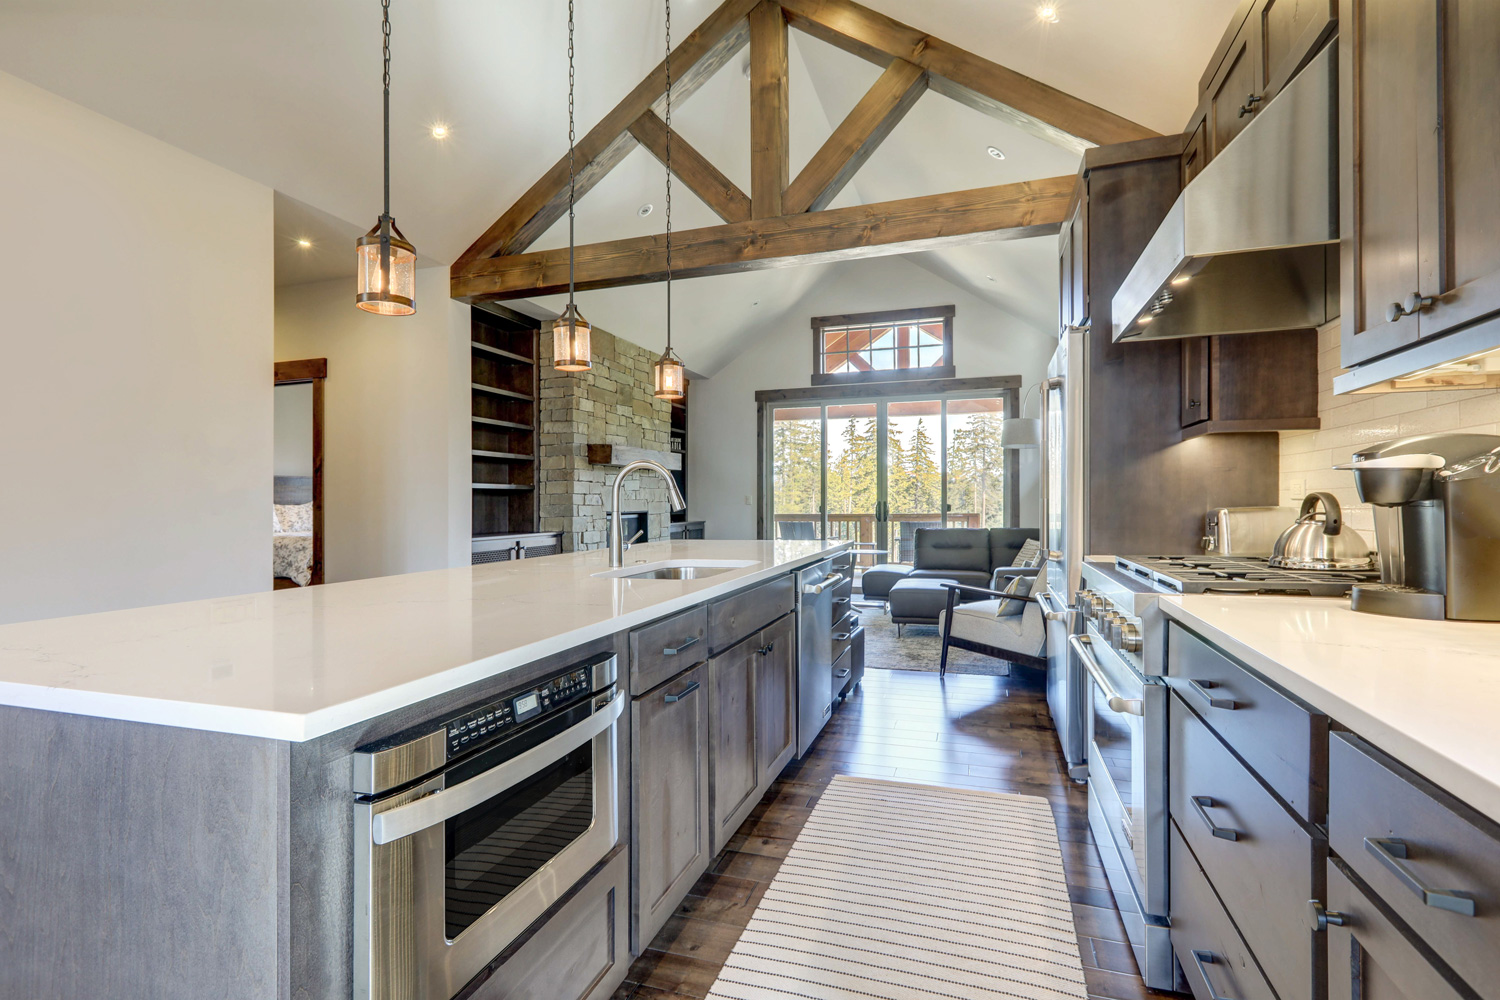 Amazing modern and rustic luxury kitchen with vaulted ceiling and wooden beams long island with white quarts countertop and dark wood cabinets